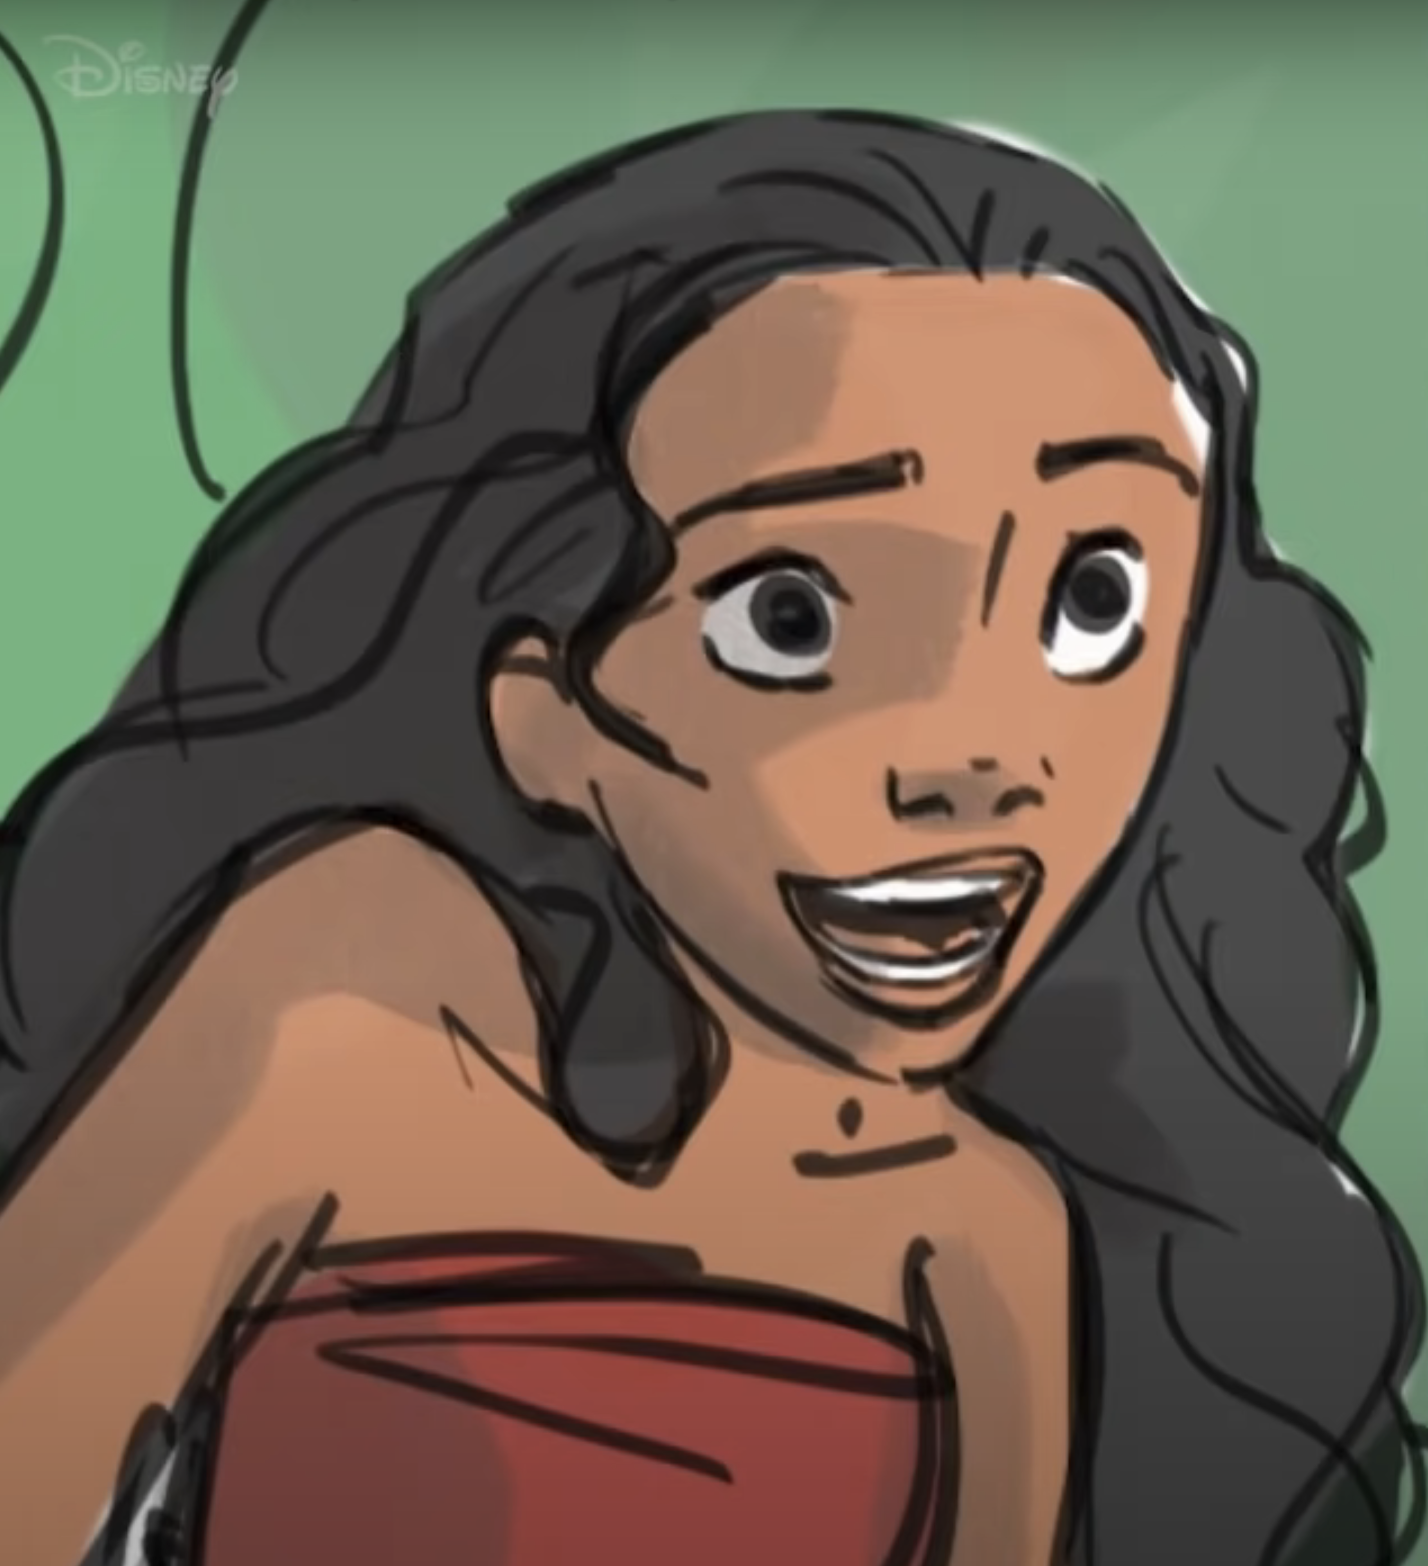 Animated character Moana from Disney, smiling, looking to the side, with long wavy hair